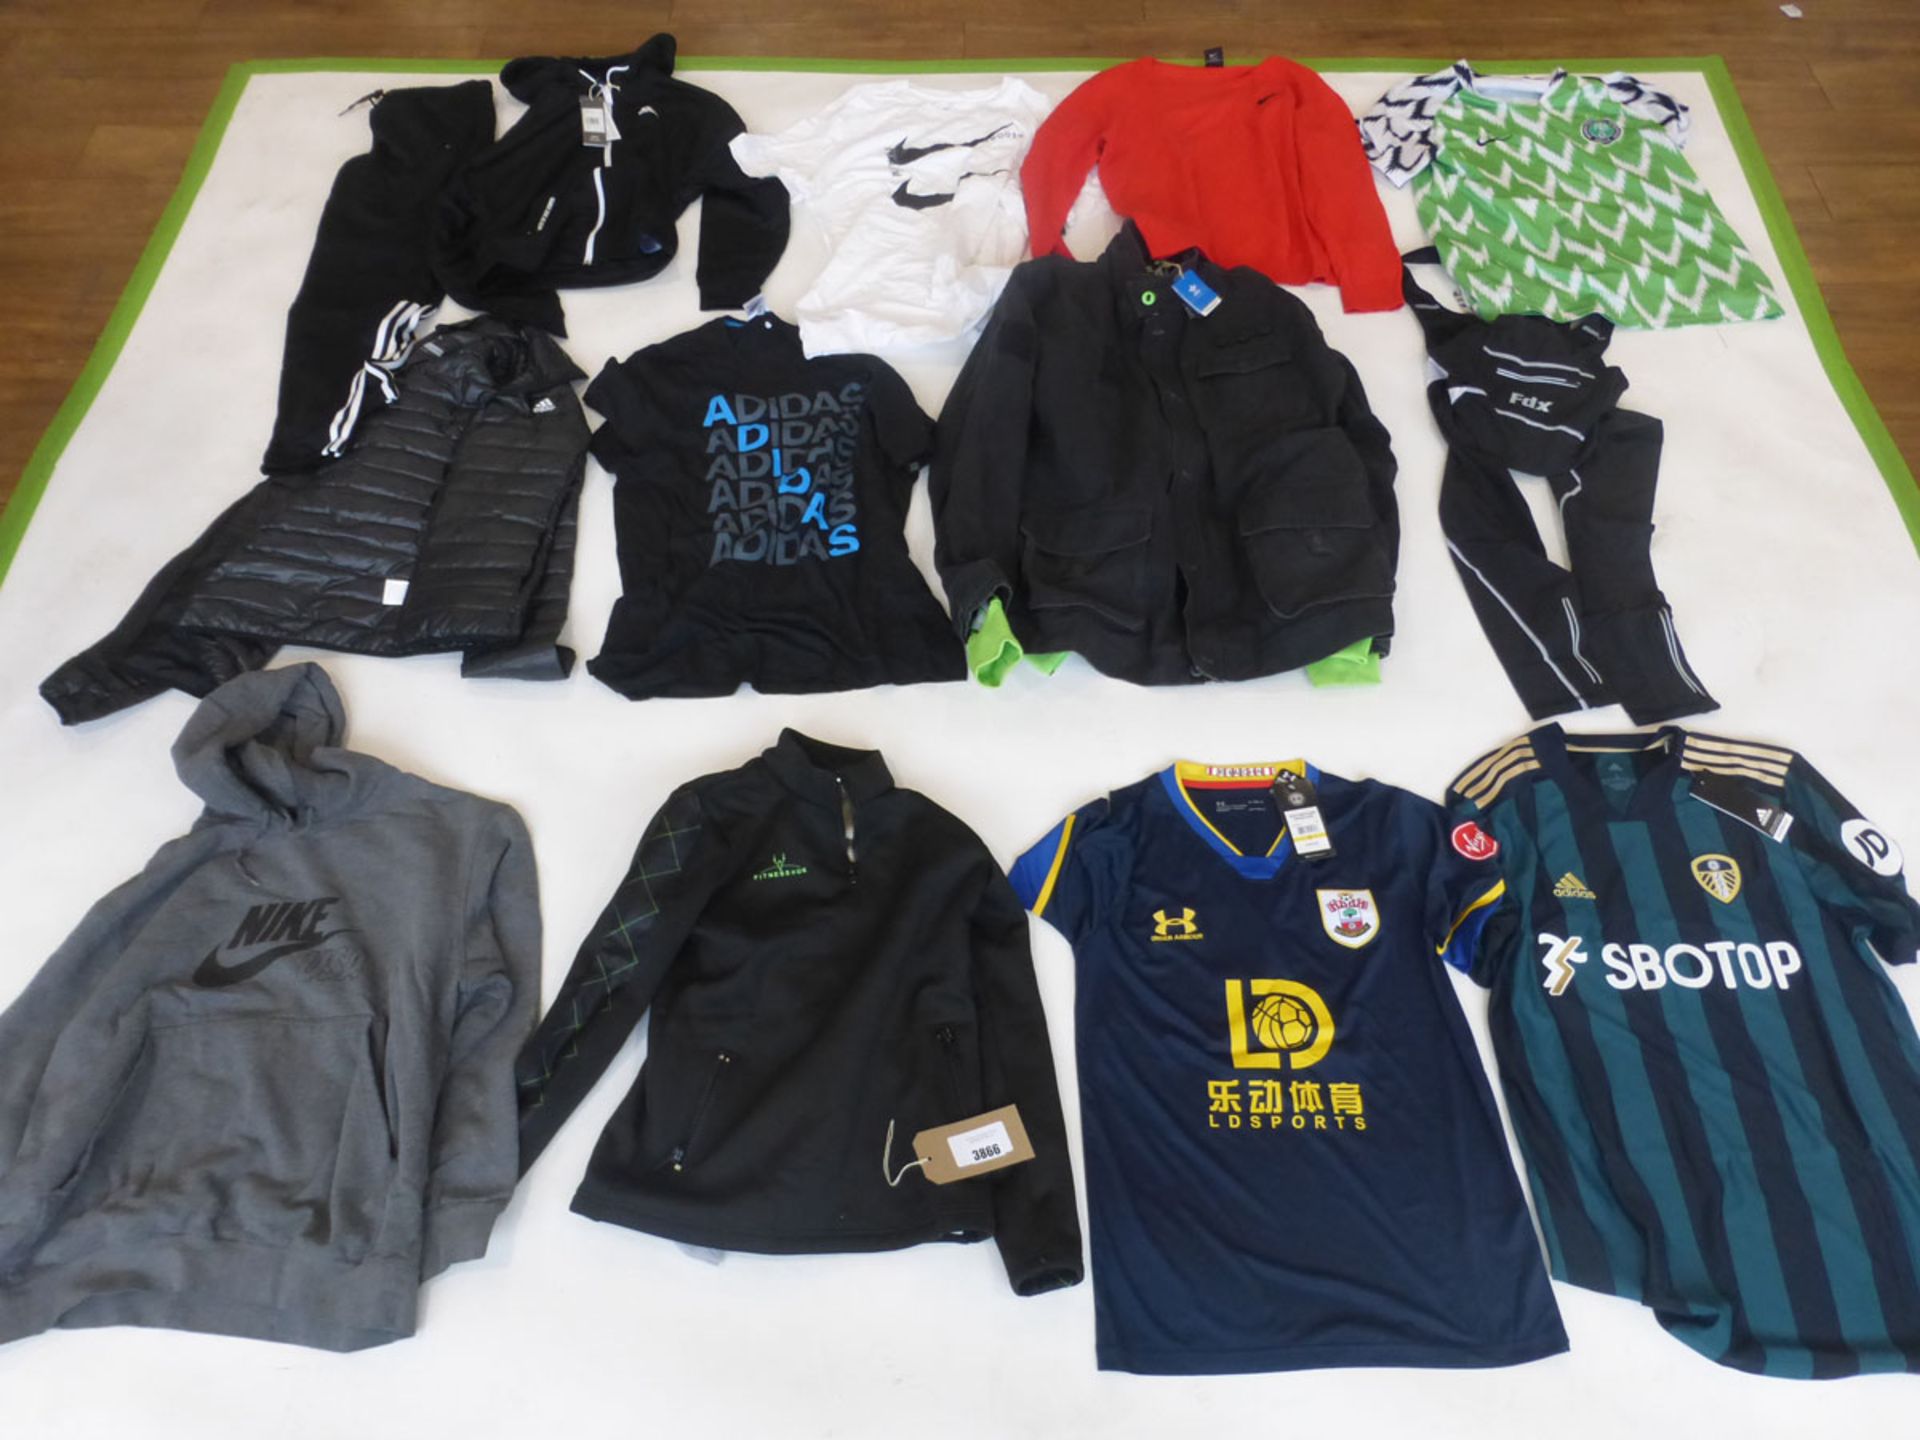 Selection of sportswear to include Adidas, Under Armour, Nike, etc